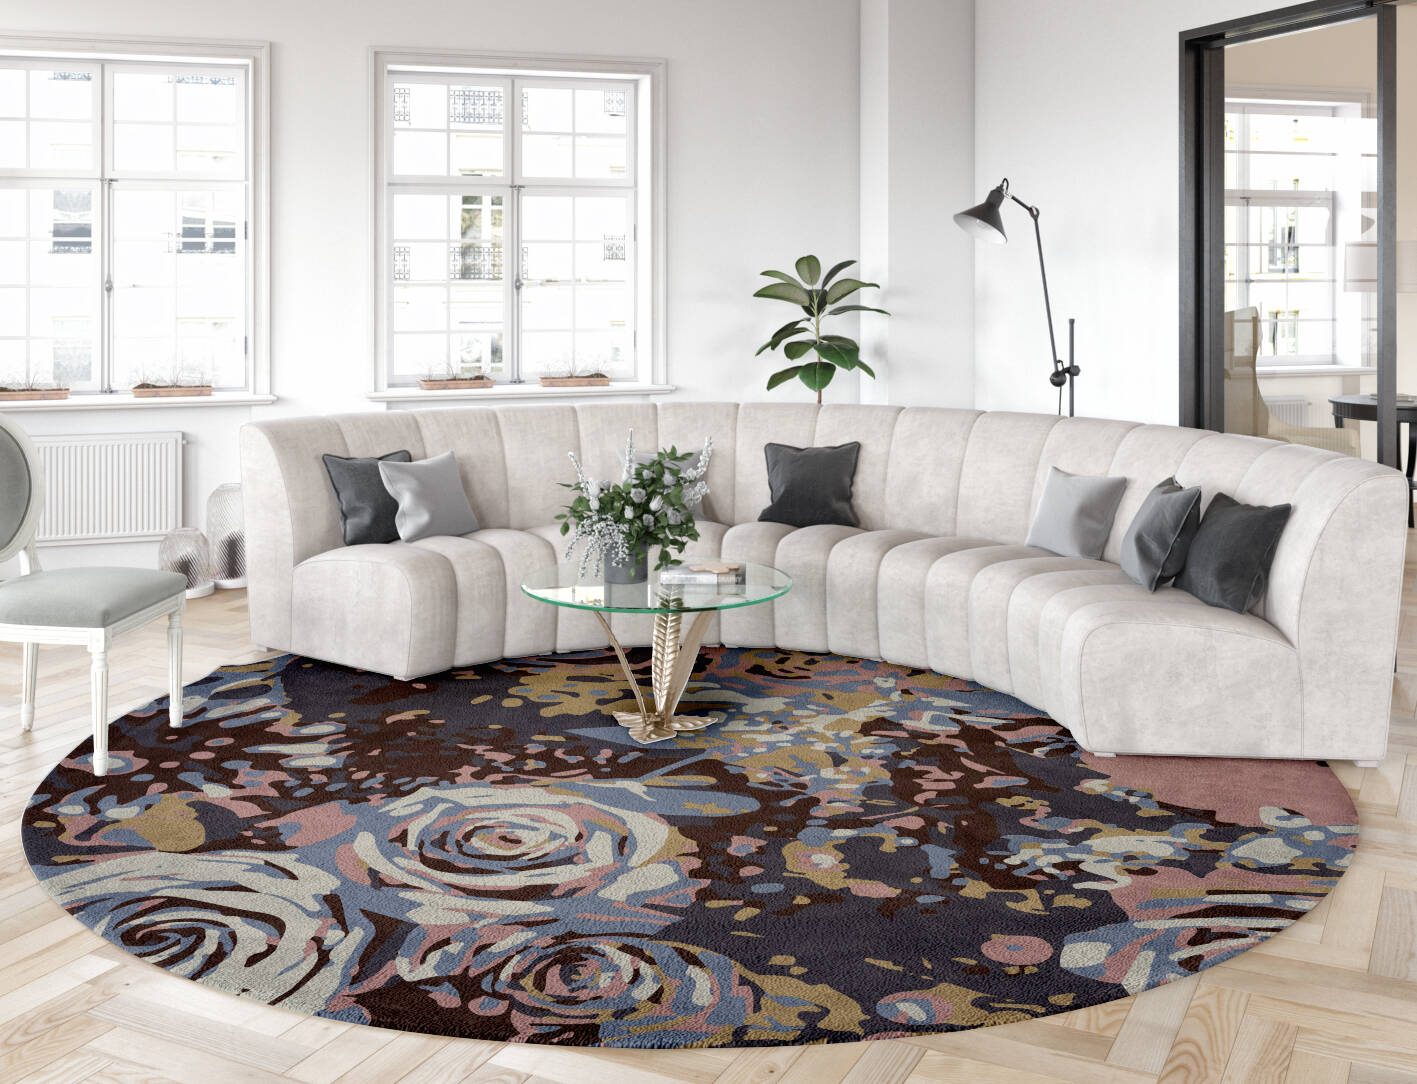 Nosegay Floral Round Hand Tufted Pure Wool Custom Rug by Rug Artisan